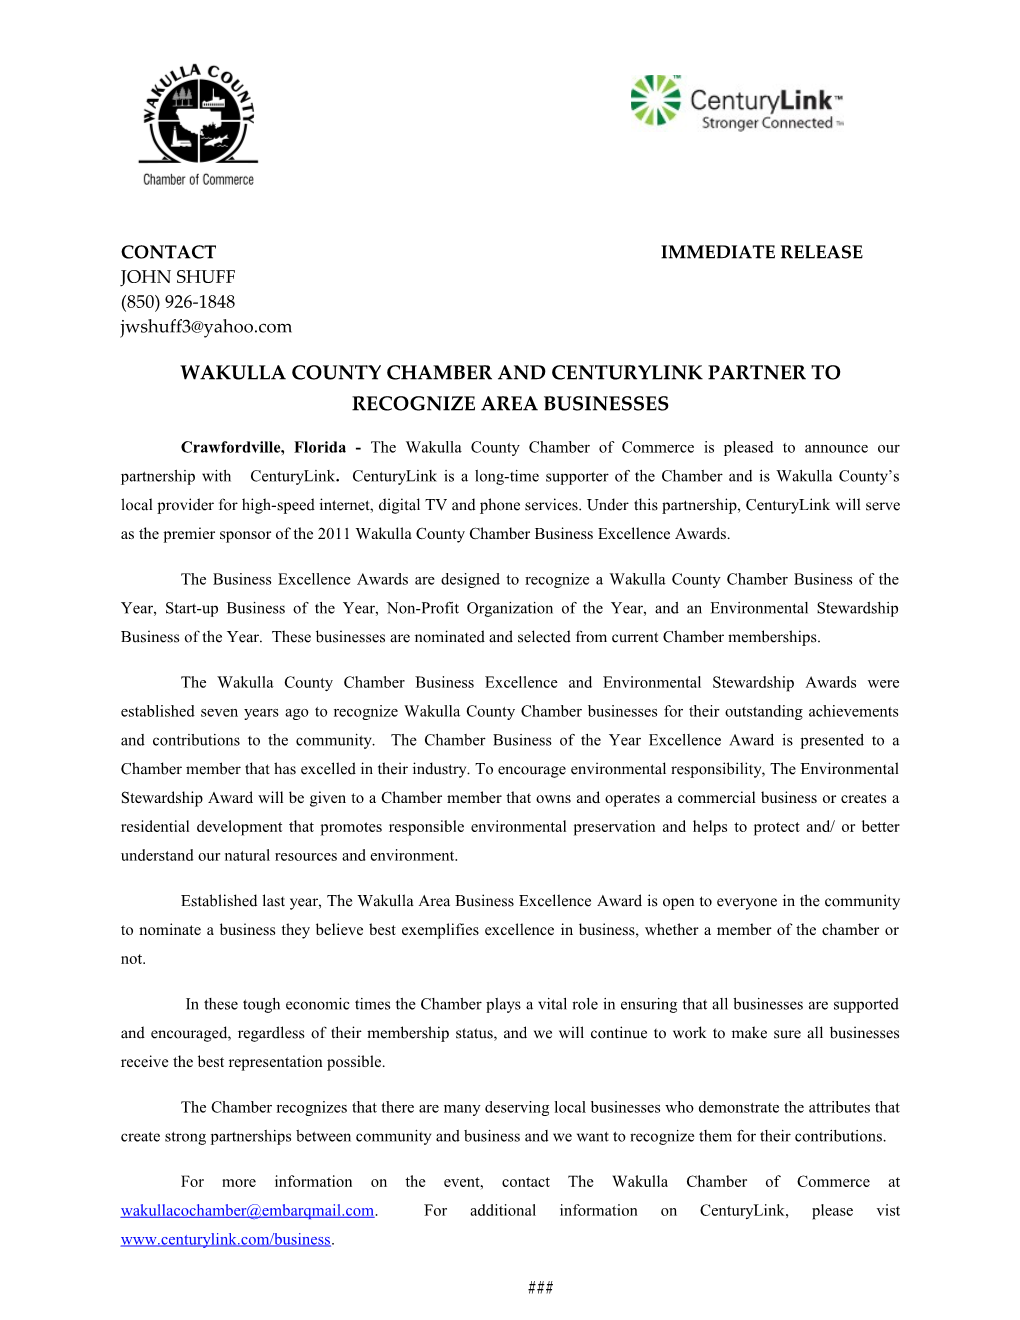 Wakulla Countychamber and Centurylink Partner to Recognize Area Businesses